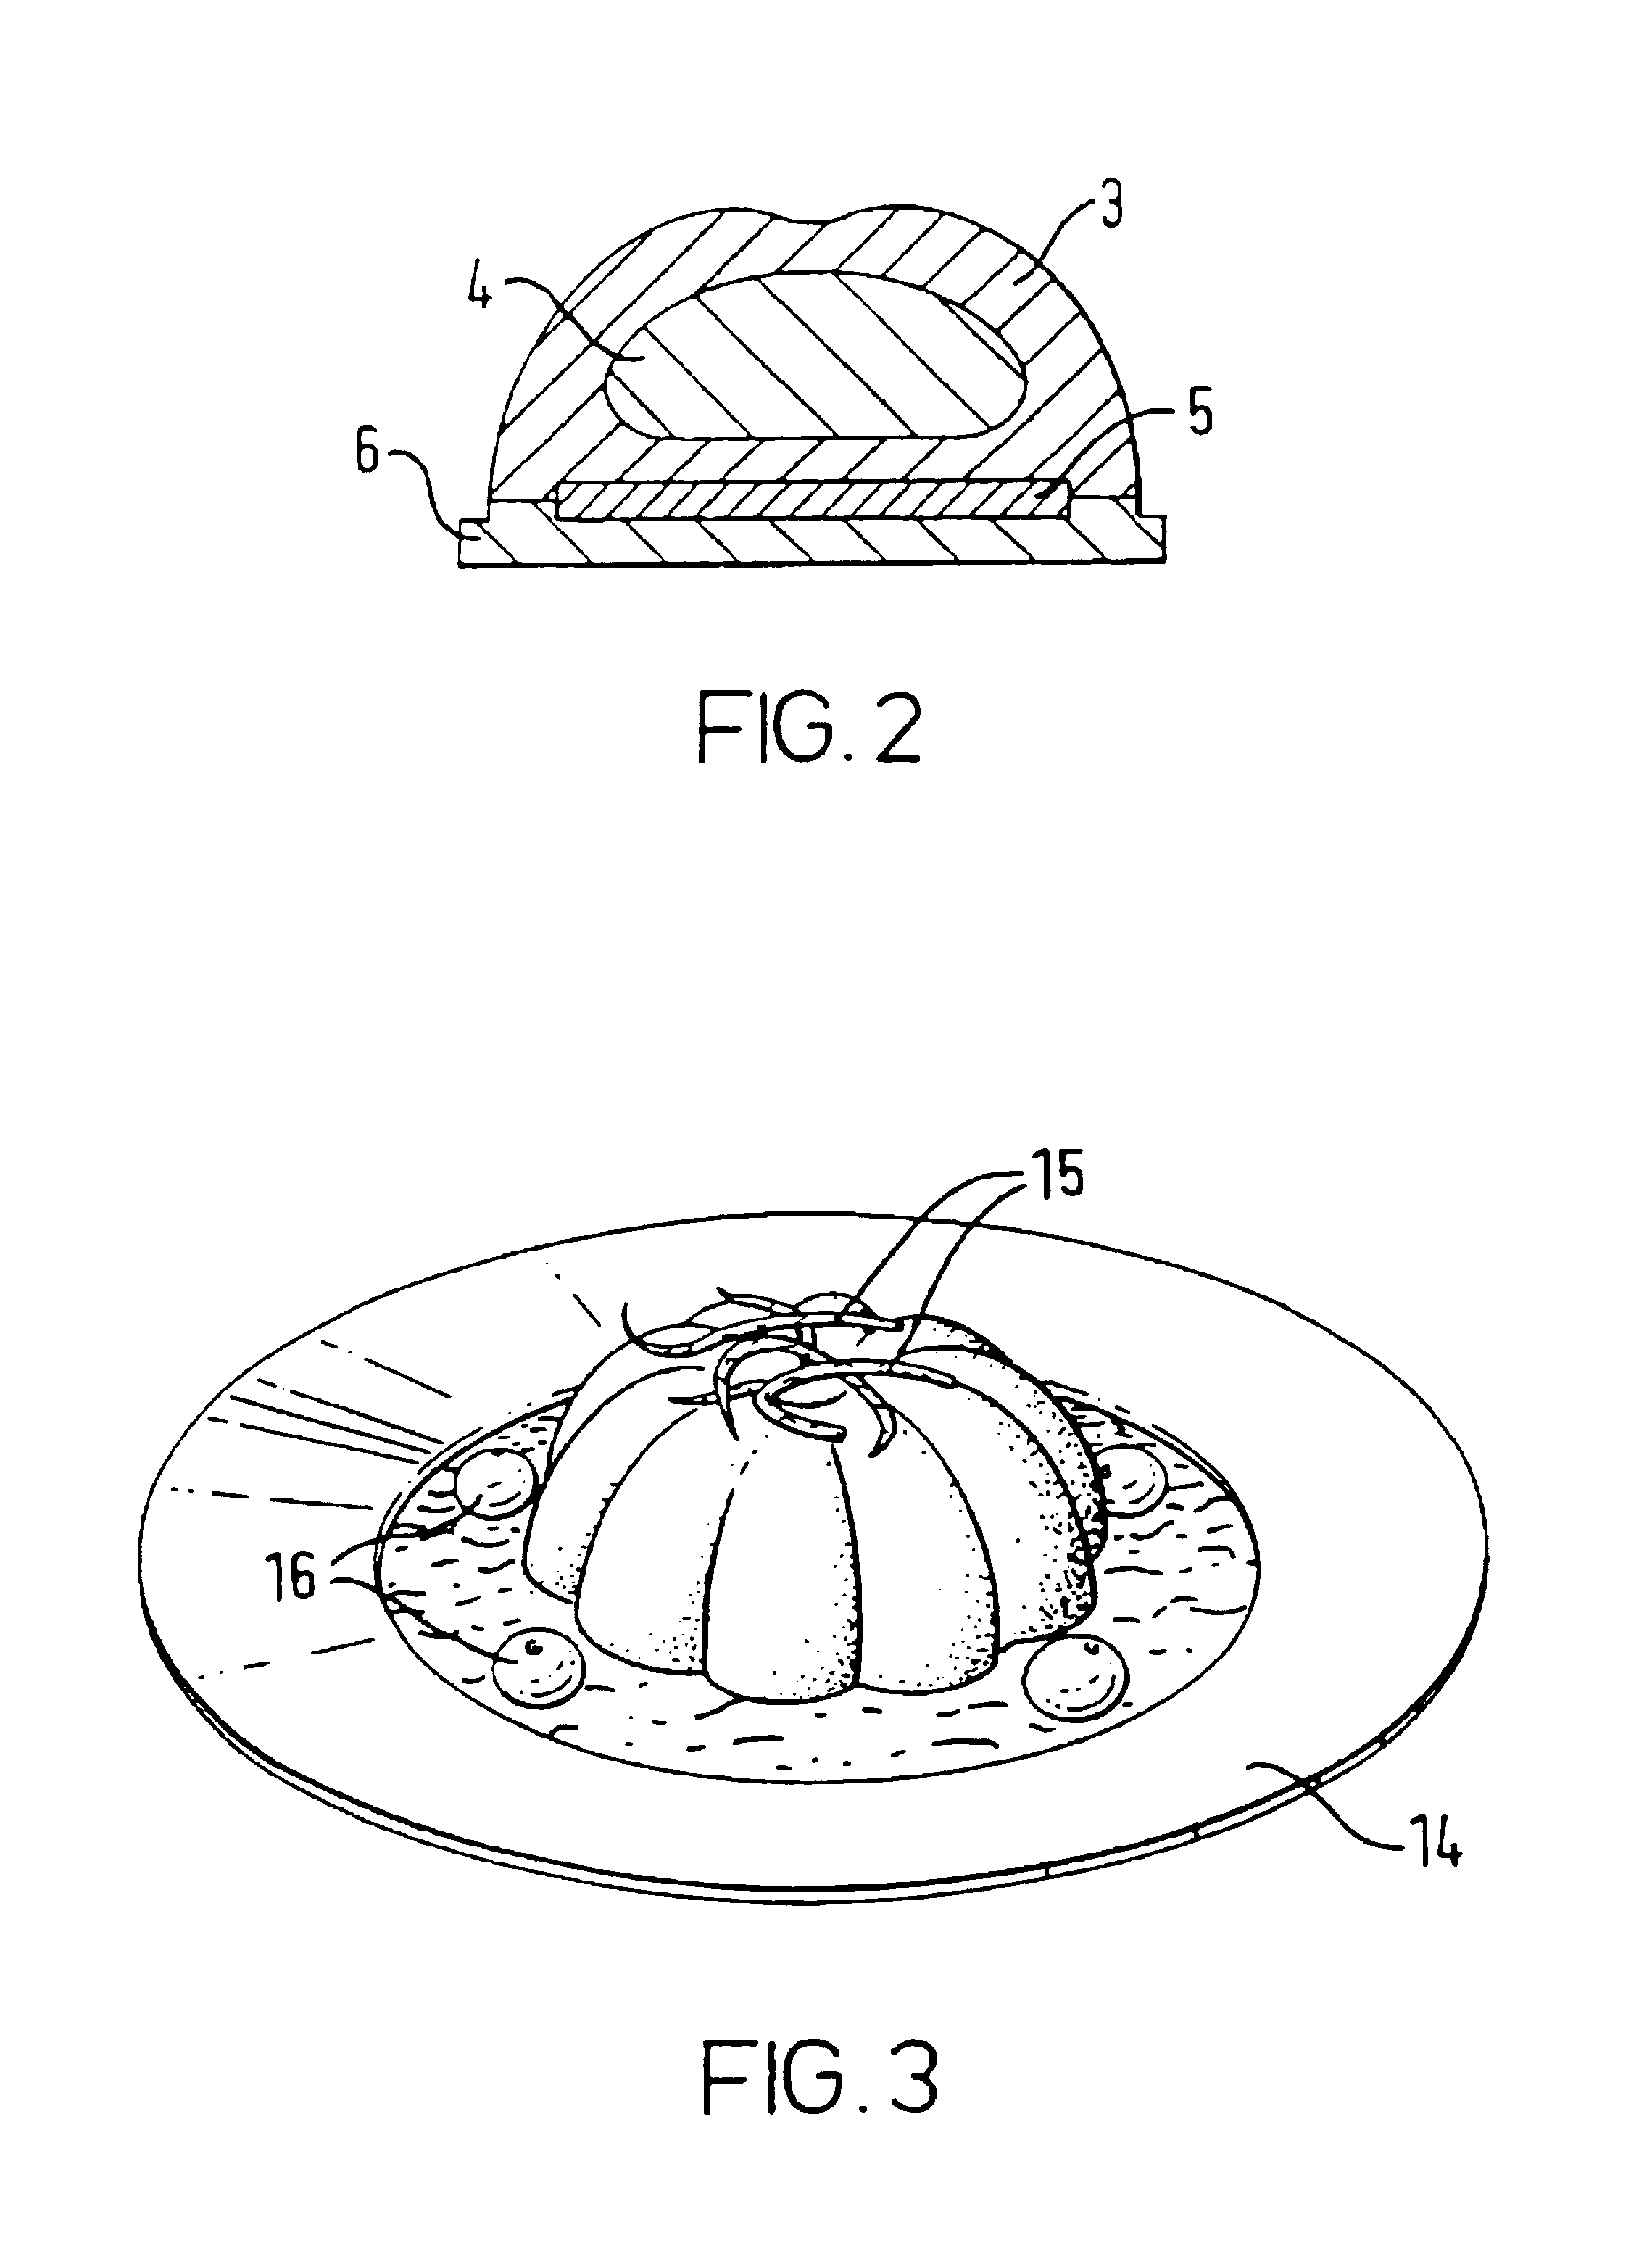 Frozen dessert and process of manufacture